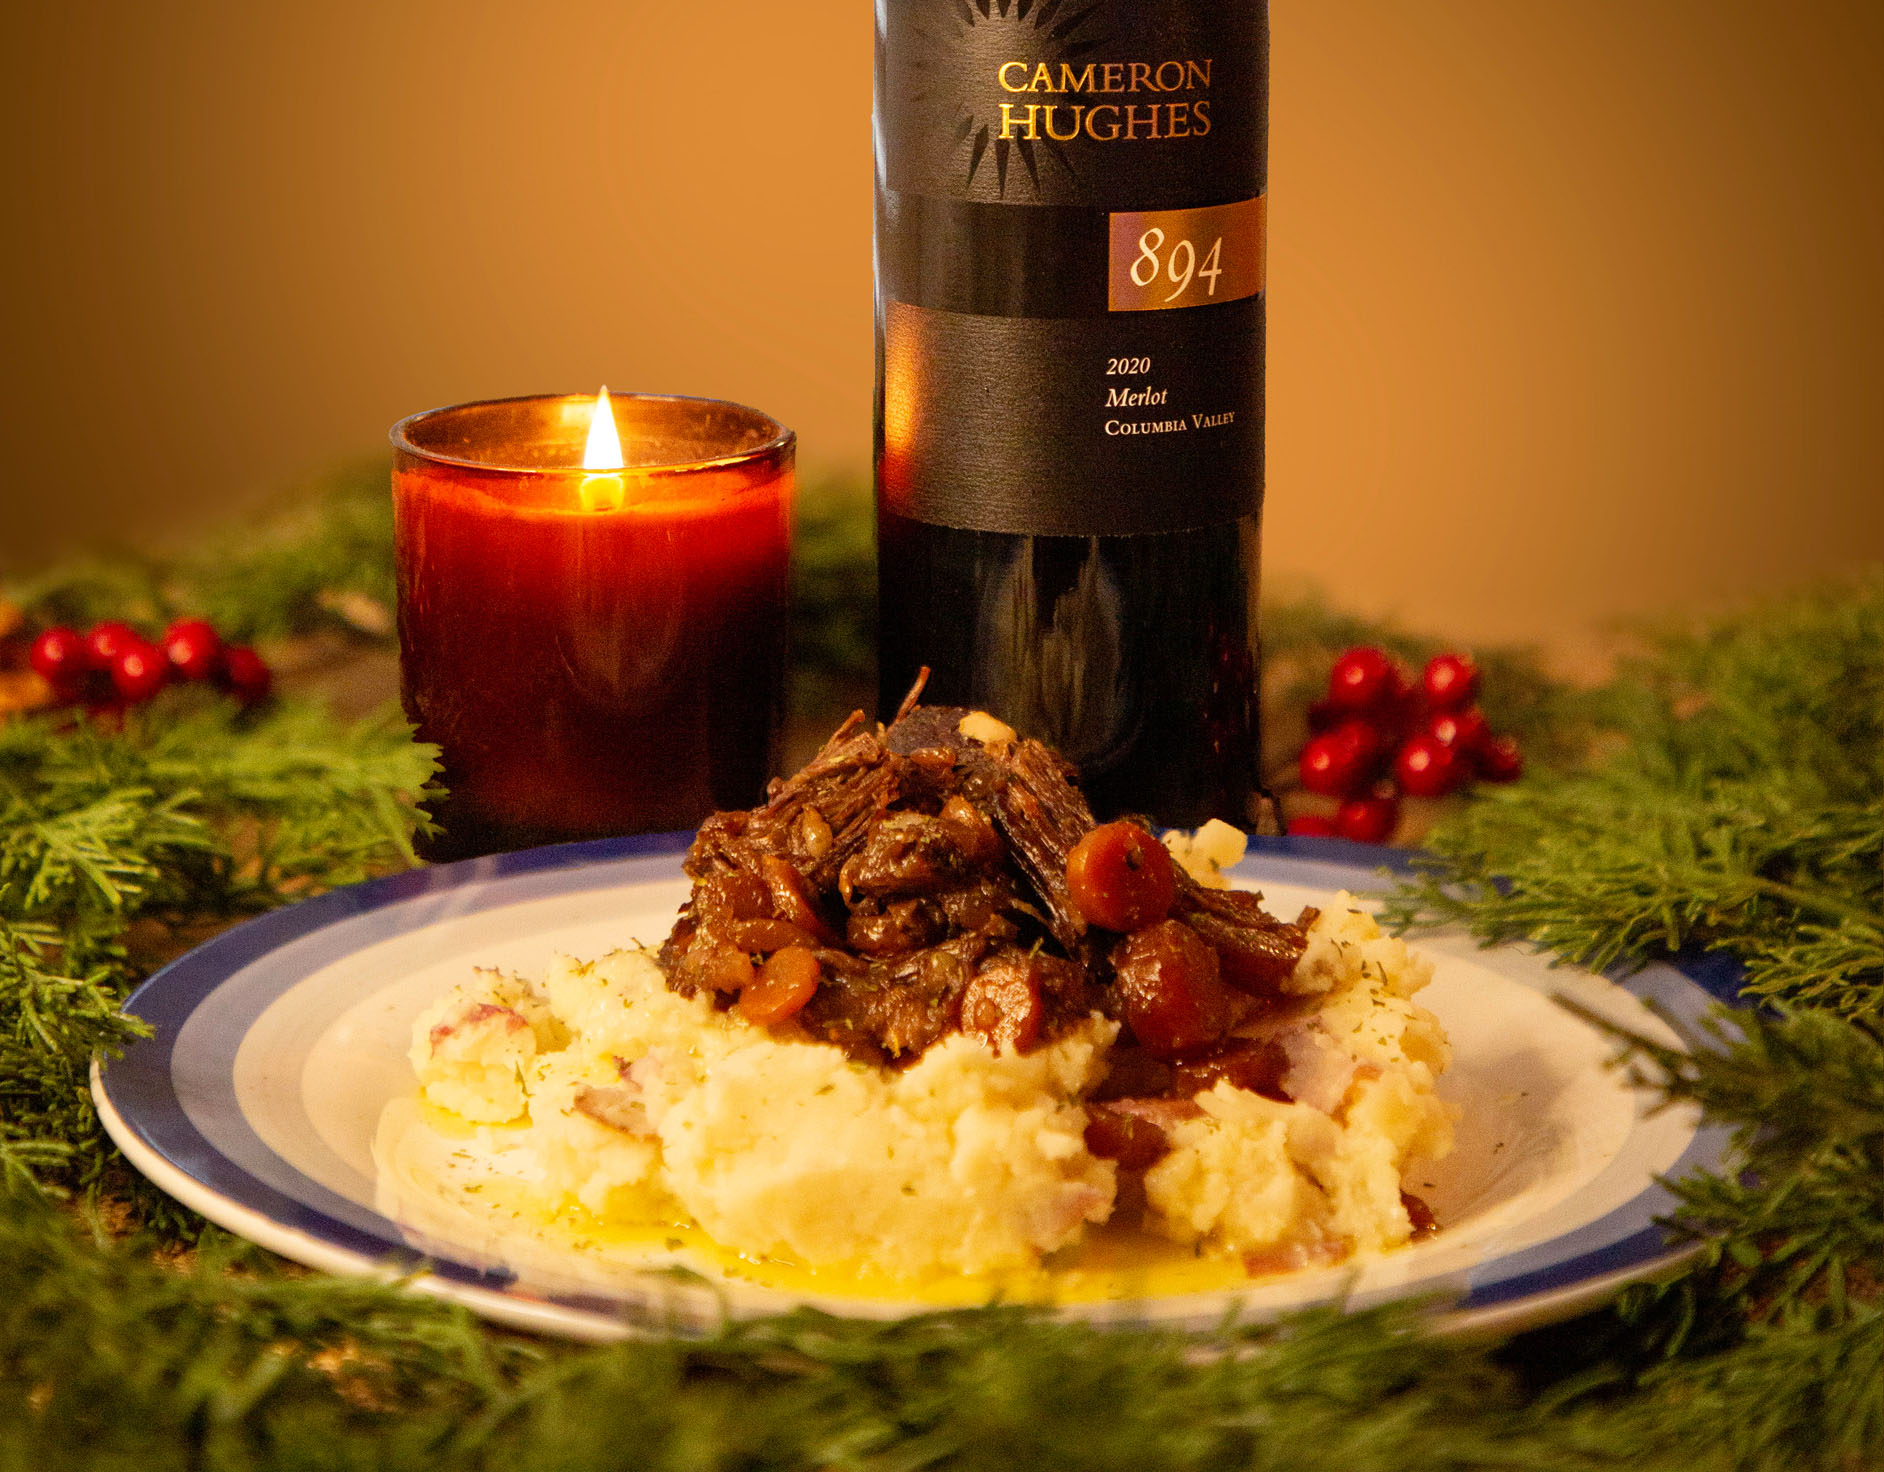 Cameron Hughes Wine Lot 894 with Red Wine Braised Ribs on Mashed Potatoes